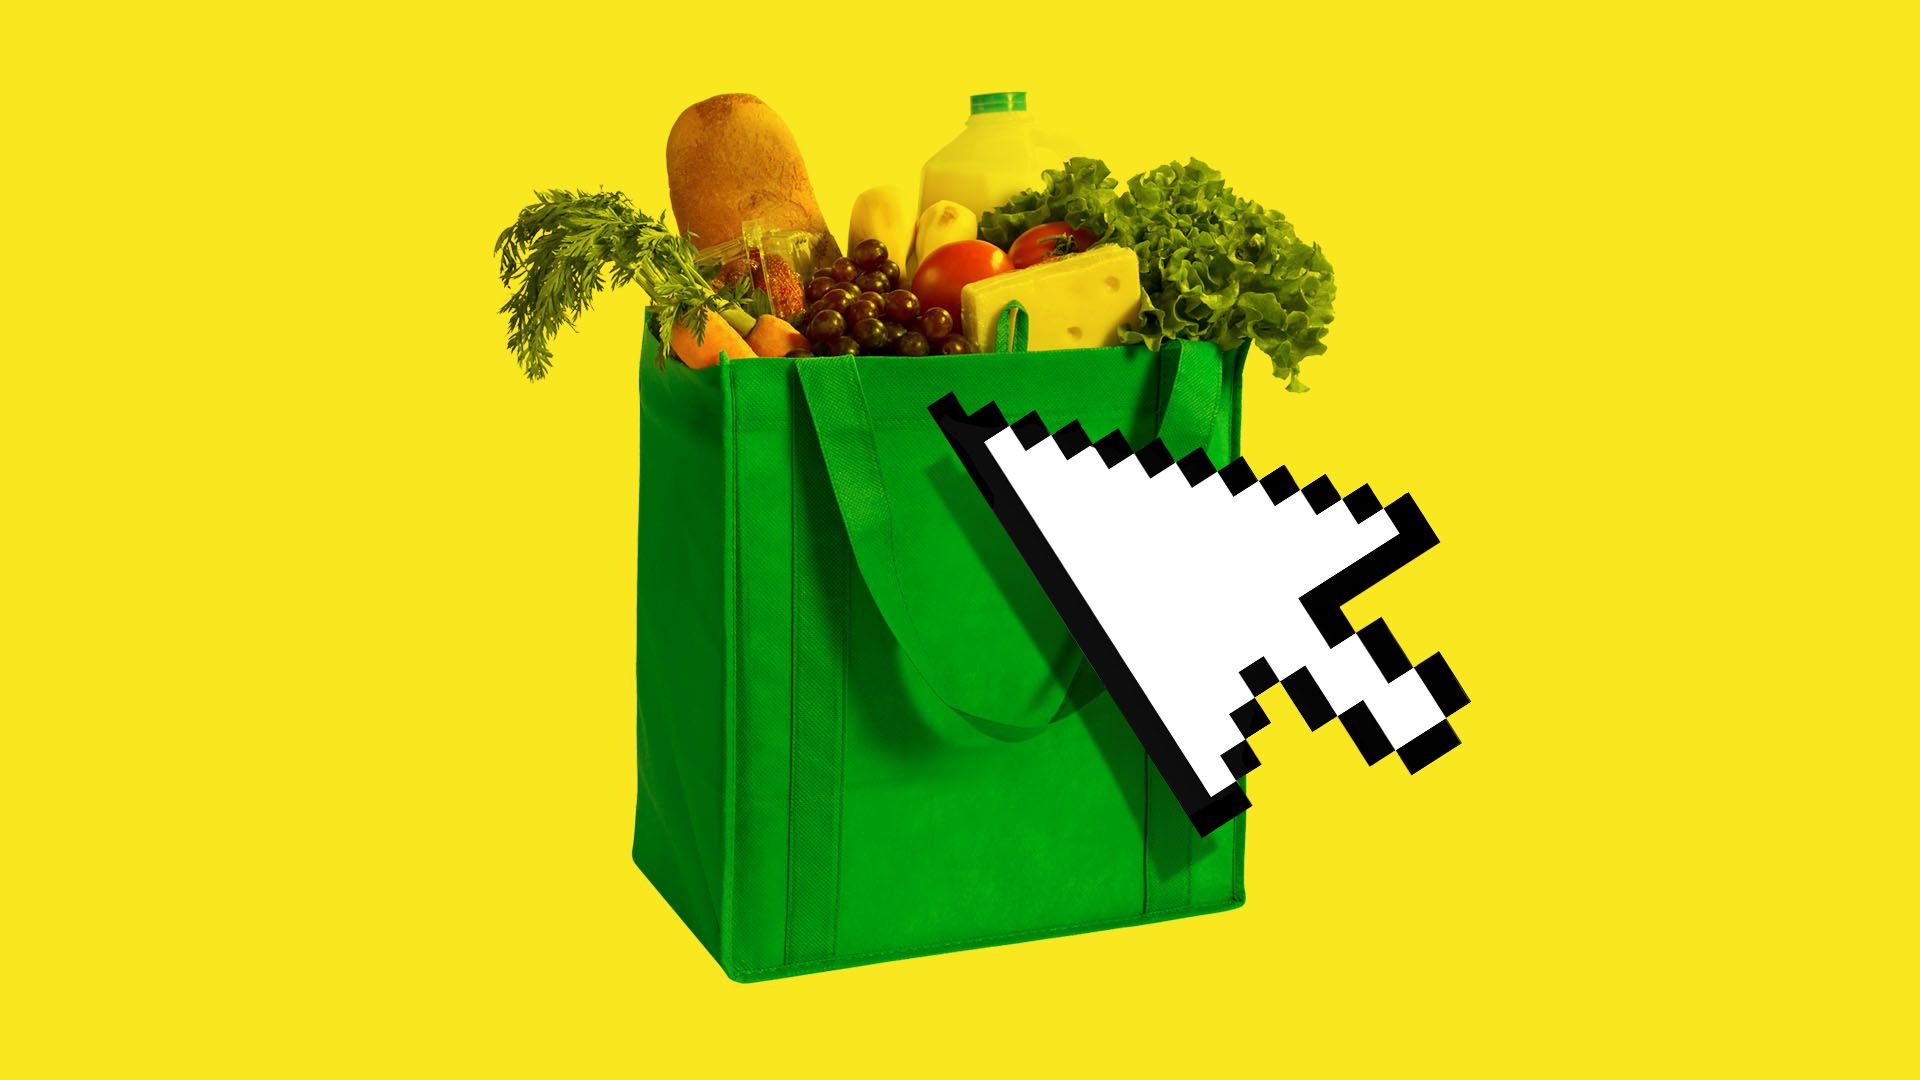 In this illustration, a large digital mouse clicks on a bag of groceries